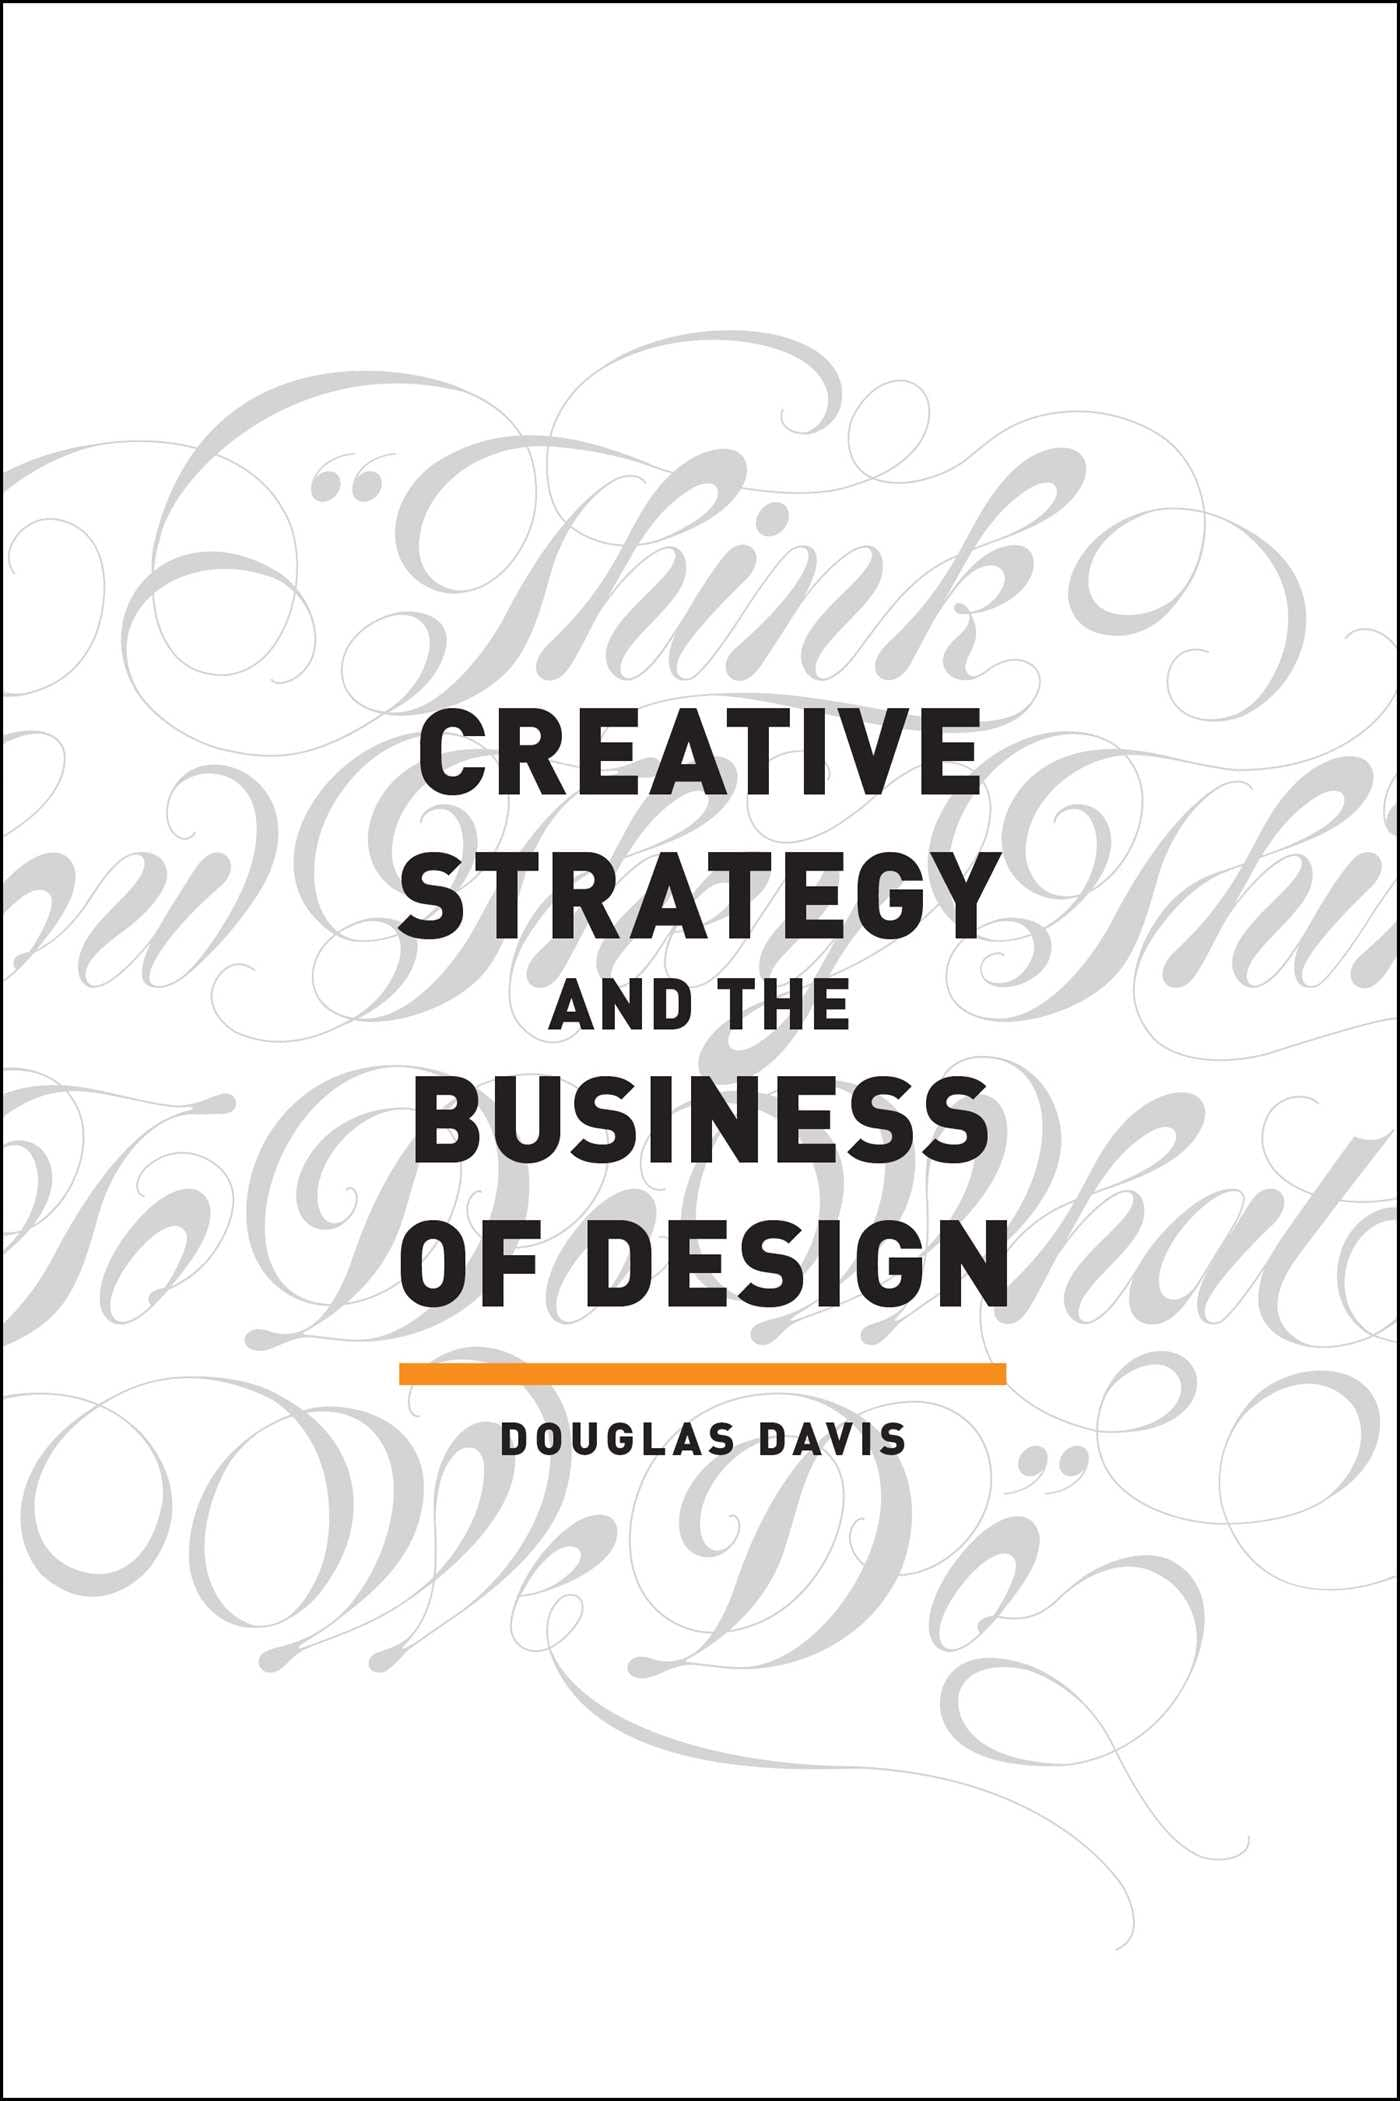 Creative Strategy and the Business of Design